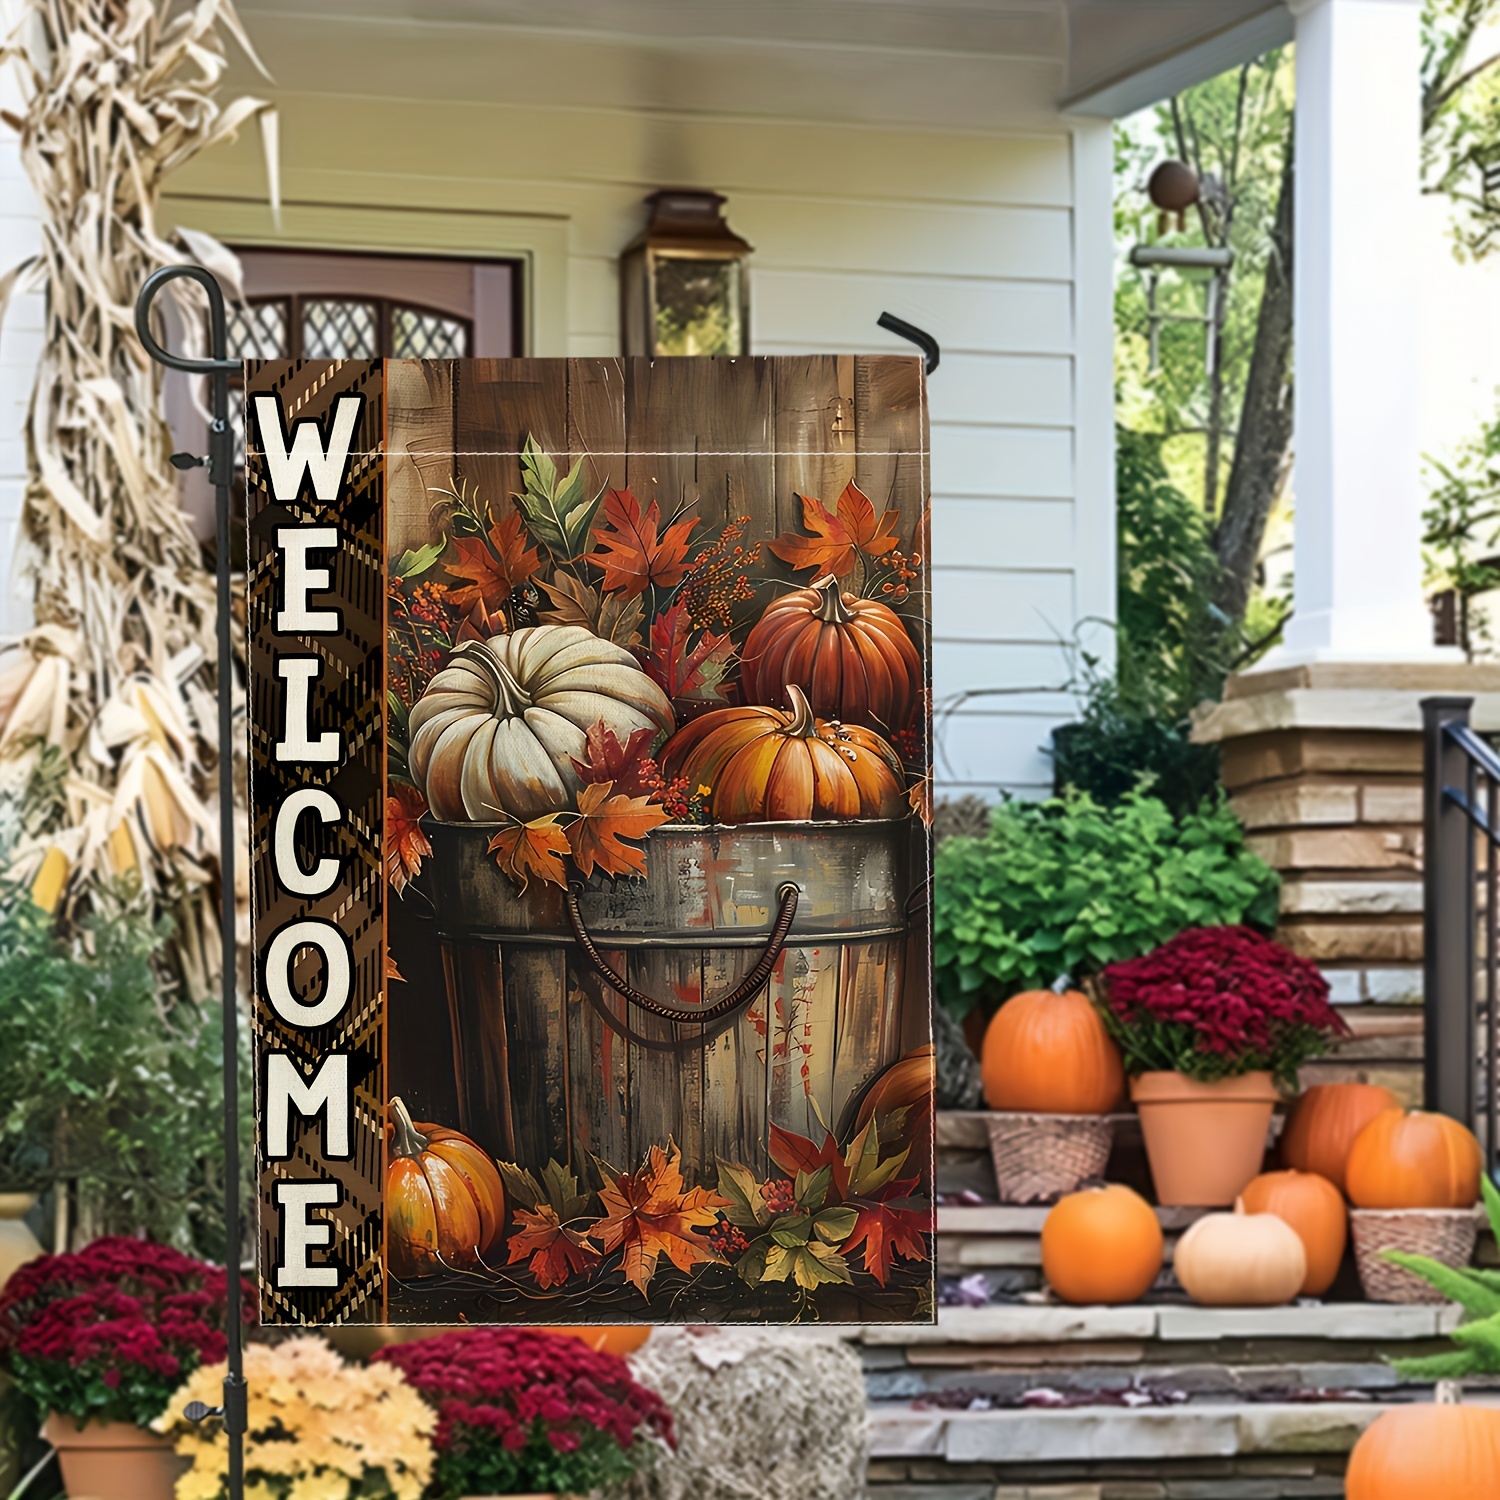 

Fall Thanksgiving Pumpkin And Autumn Leaves Welcome Garden Flag - Double-sided, Durable Polyester, Seasonal Outdoor Decoration, Fits Standard Flagpole, 12"x18" - Ideal For Garden, Patio Display